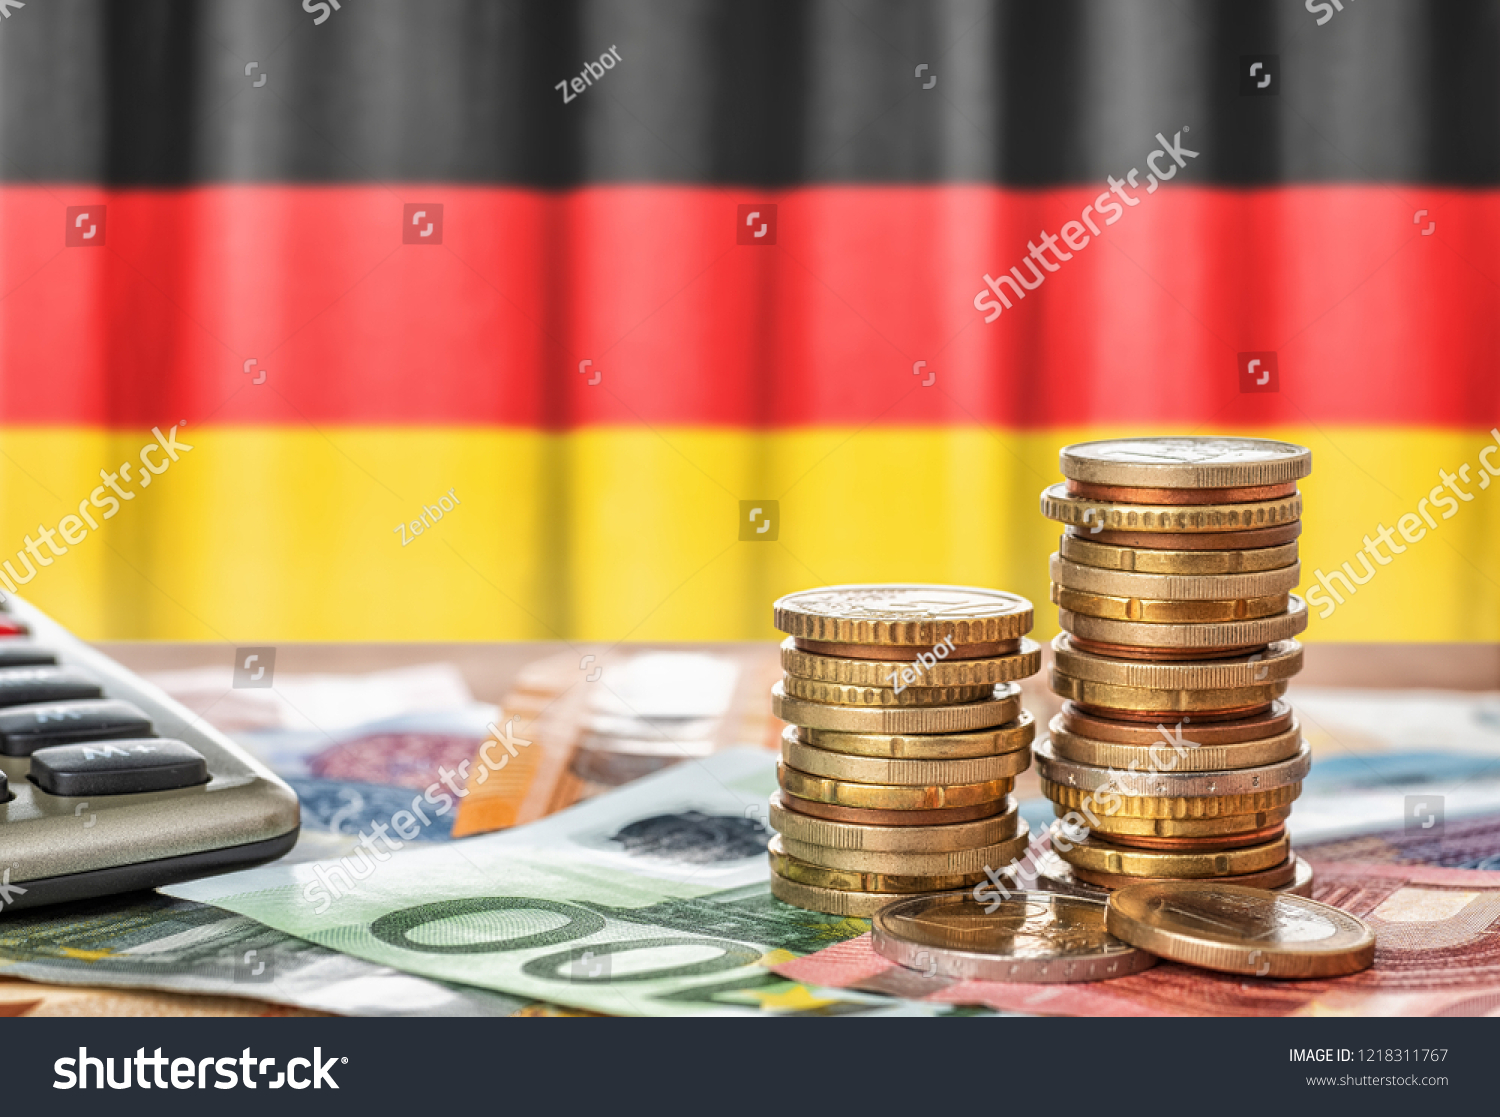 Euro banknotes and coins in front of the national flag of Germany #1218311767